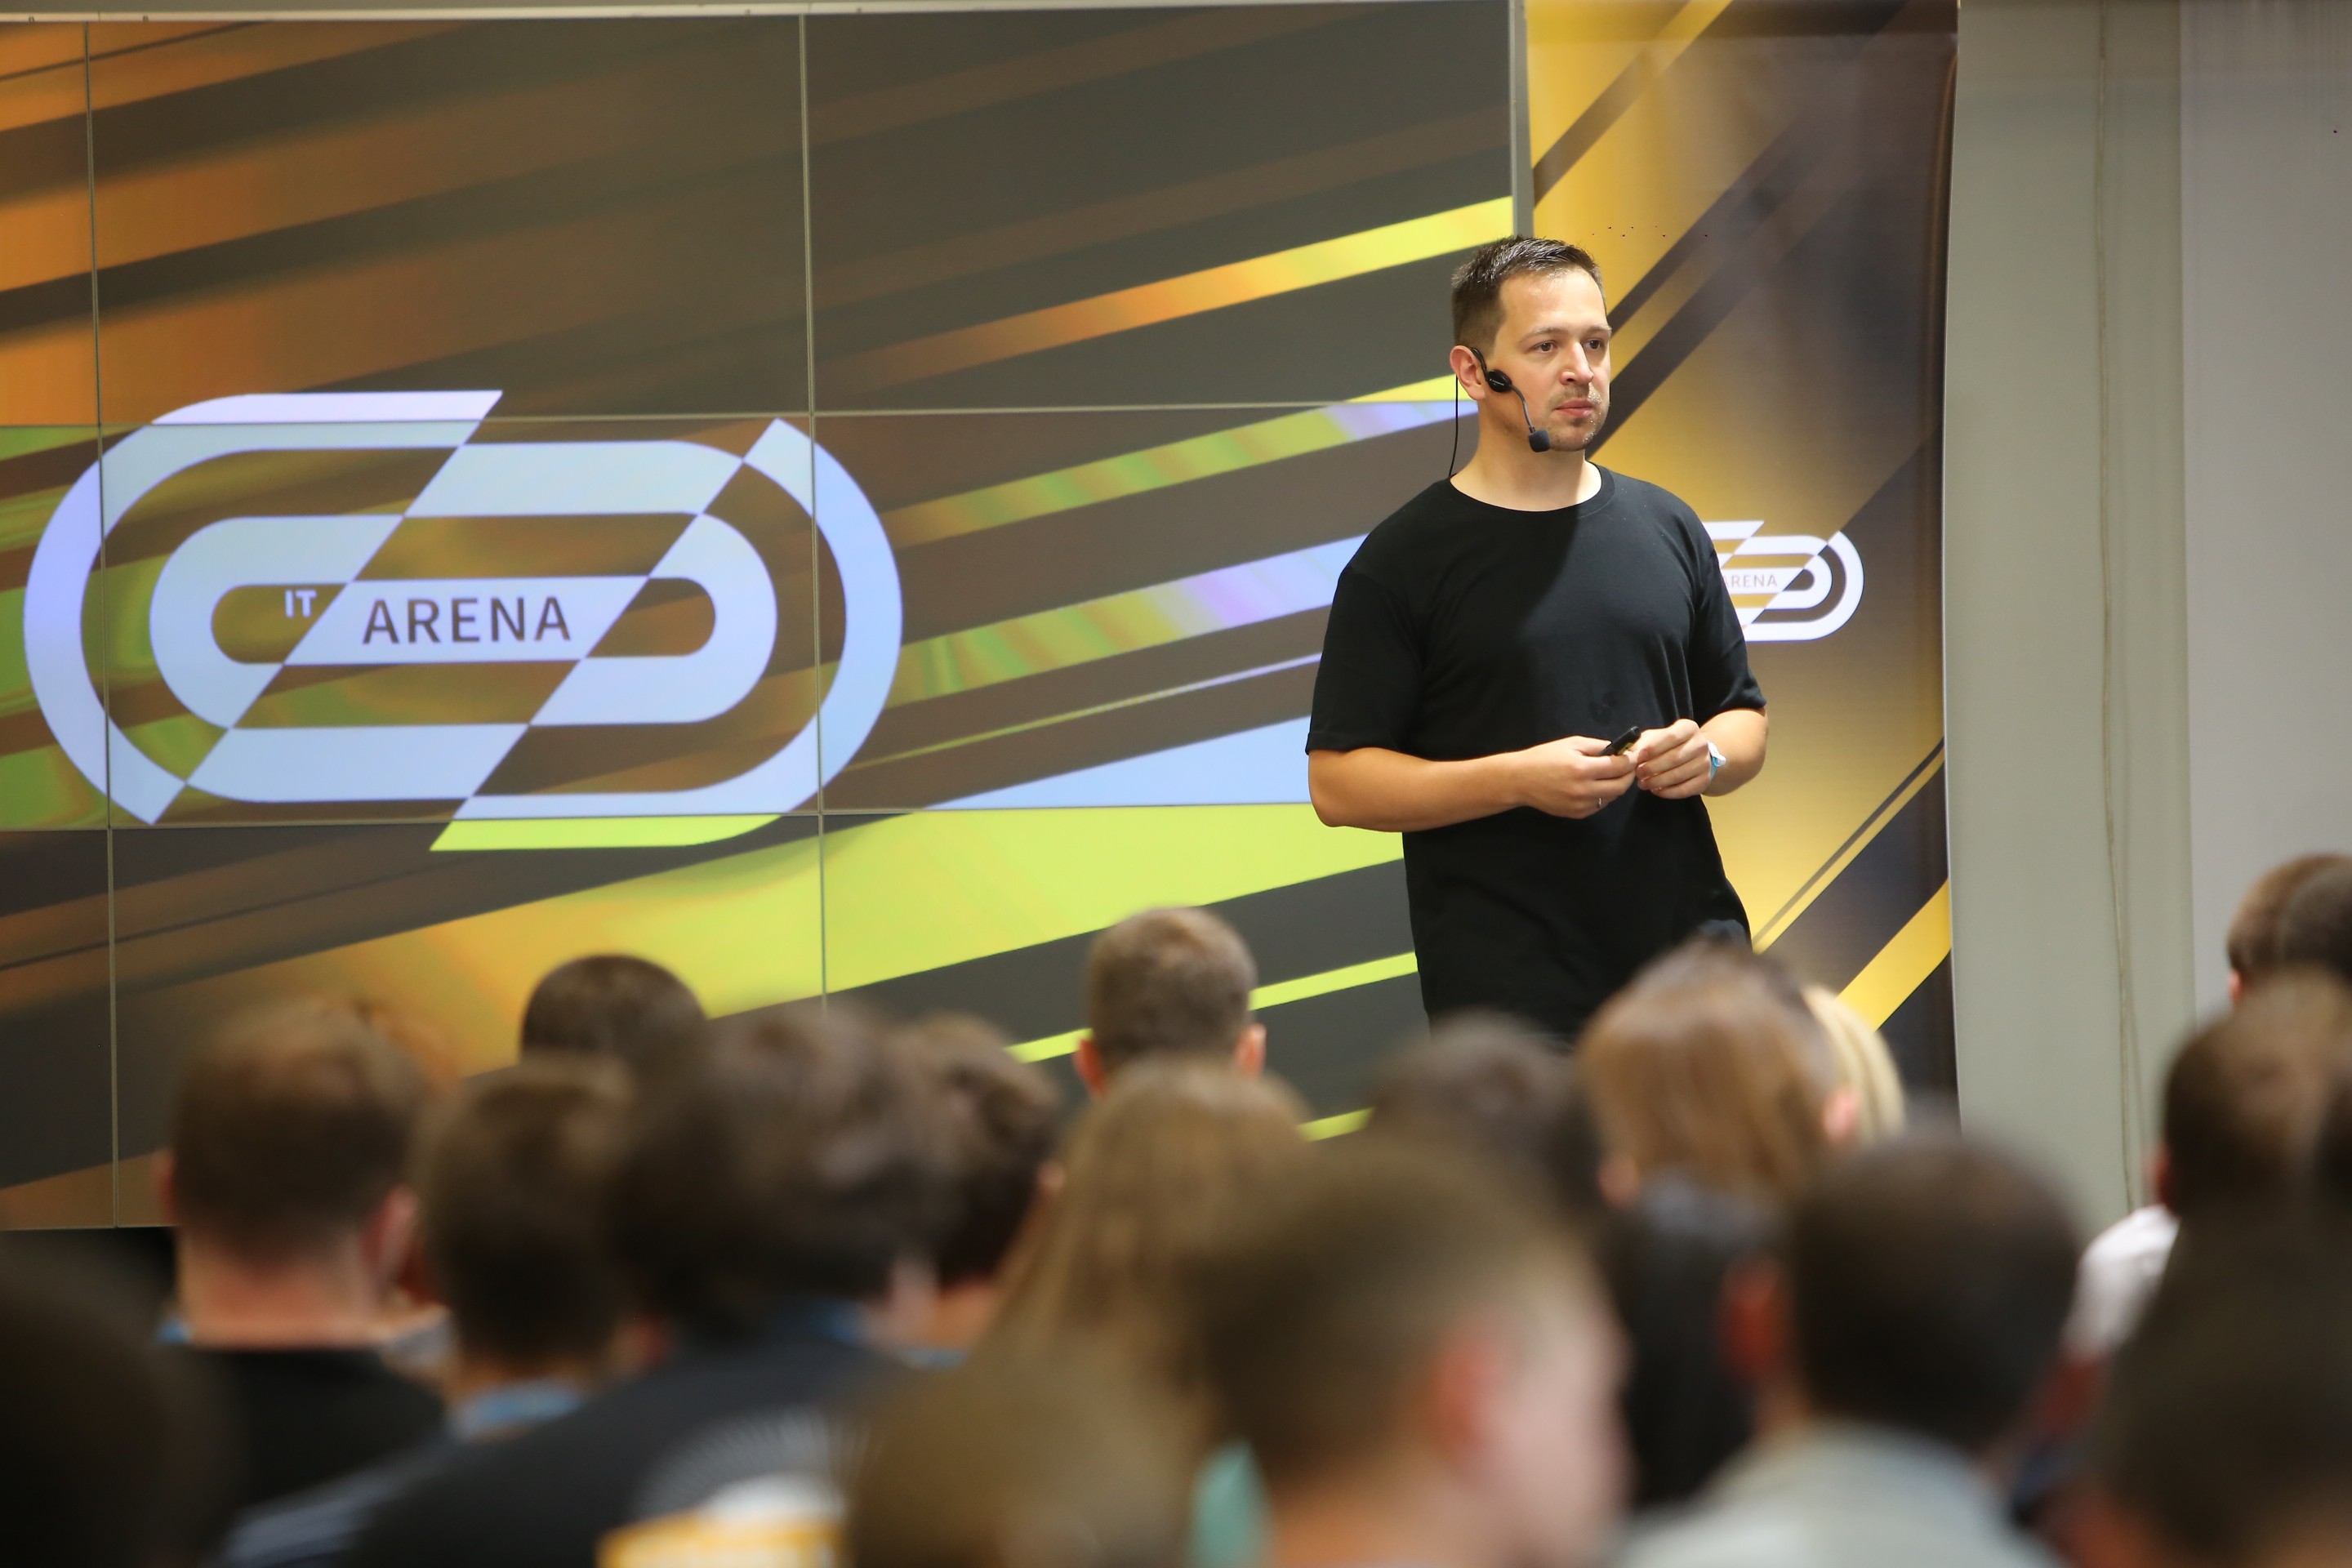 Arsen Kostenko, software engineer at Twitter, talks about technical details of Twitter operations at Lviv IT Arena 2016.